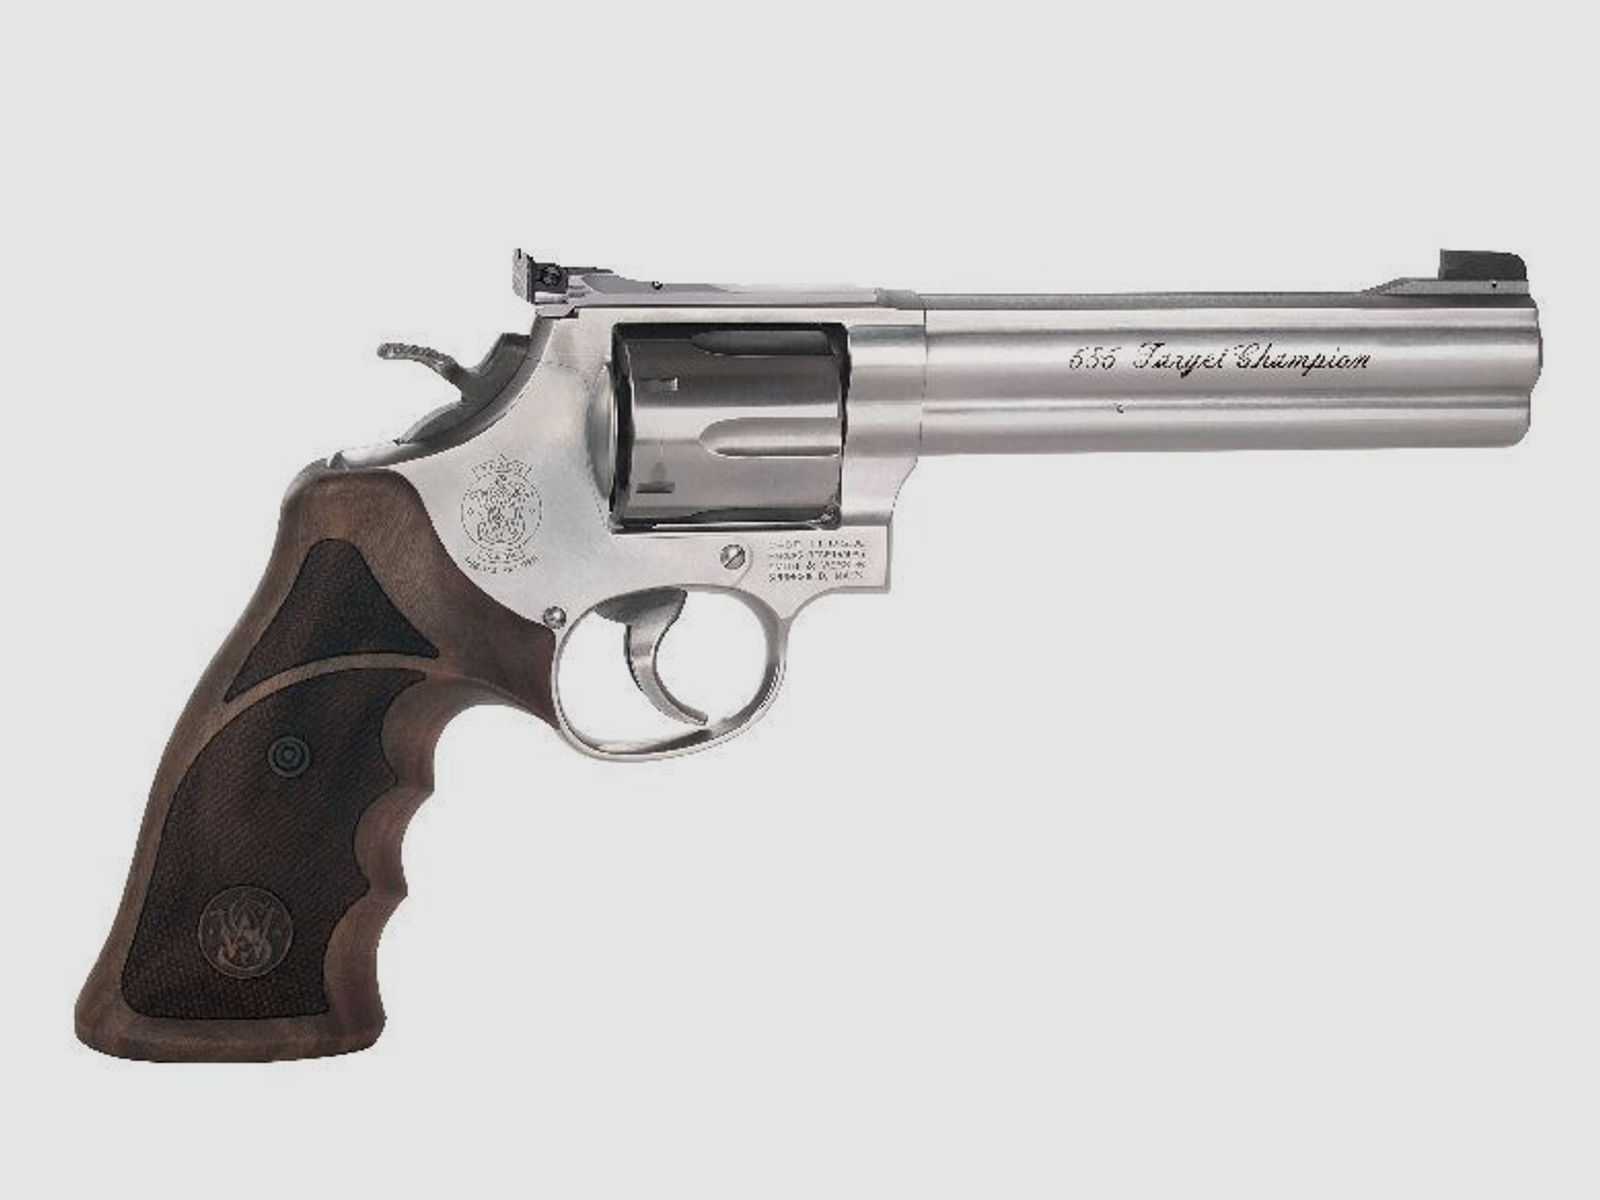 Smith & Wesson	 686 Target Champion 6"